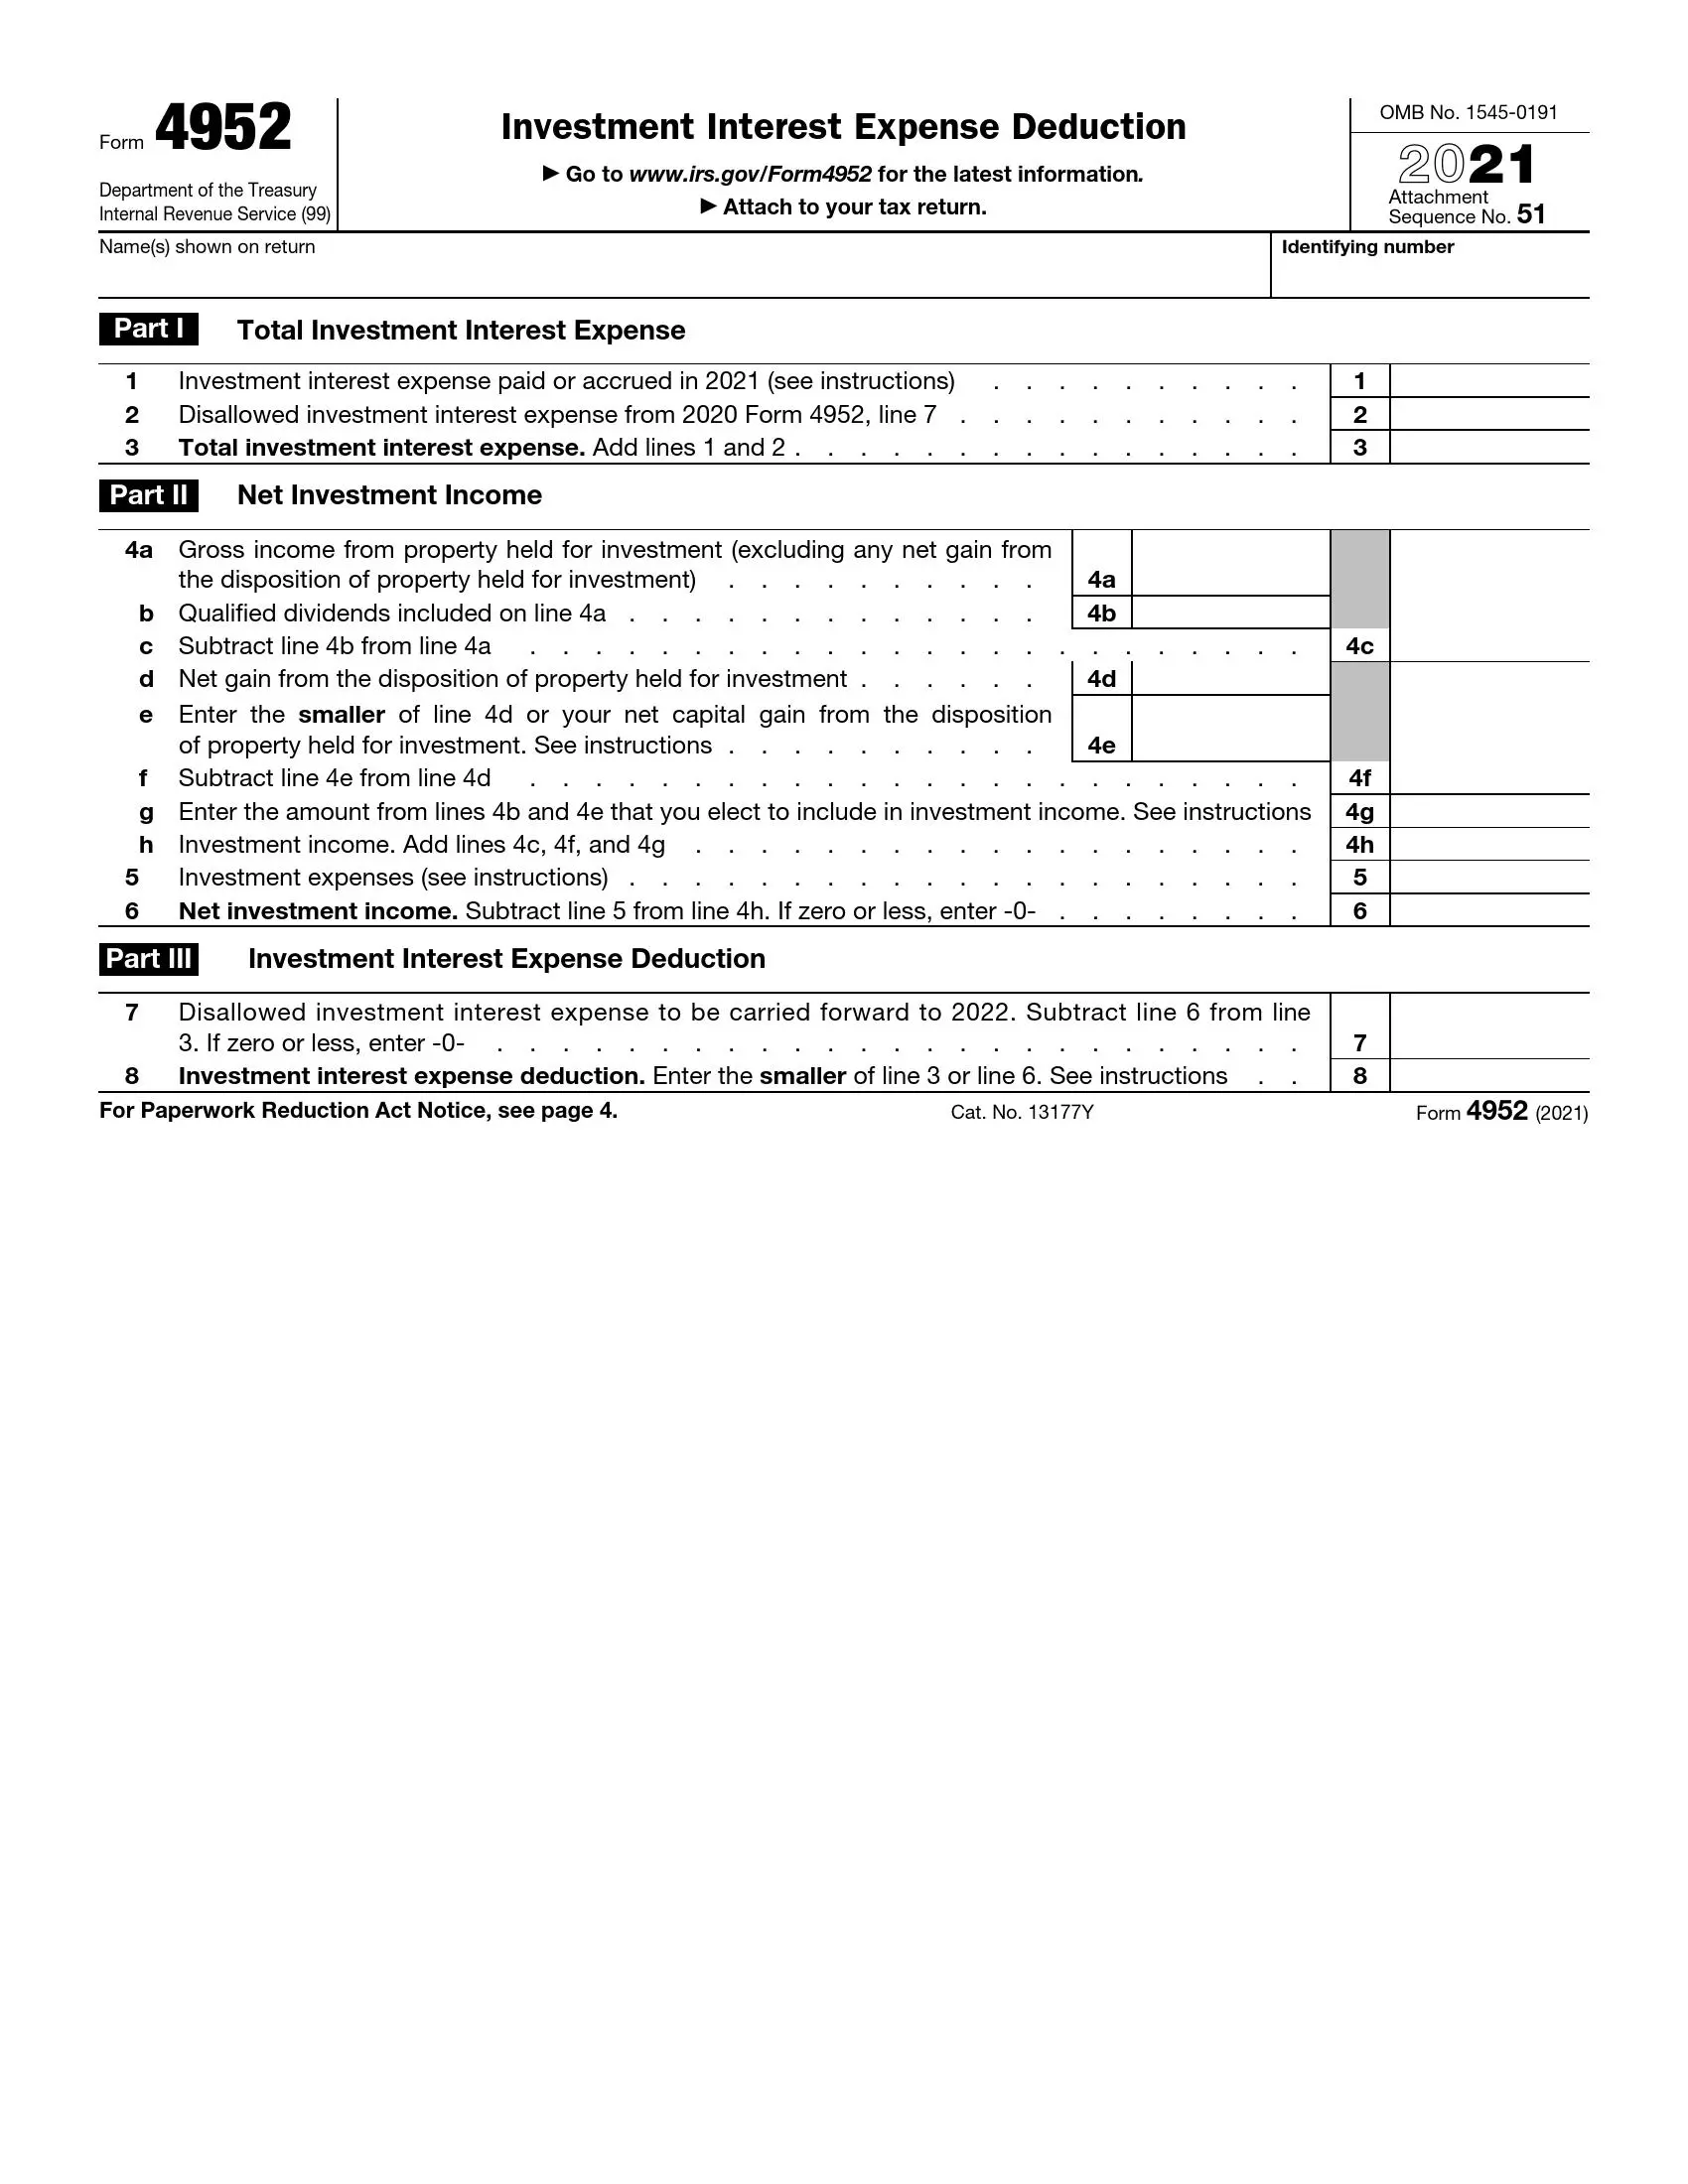 irs form 4952 2021 preview